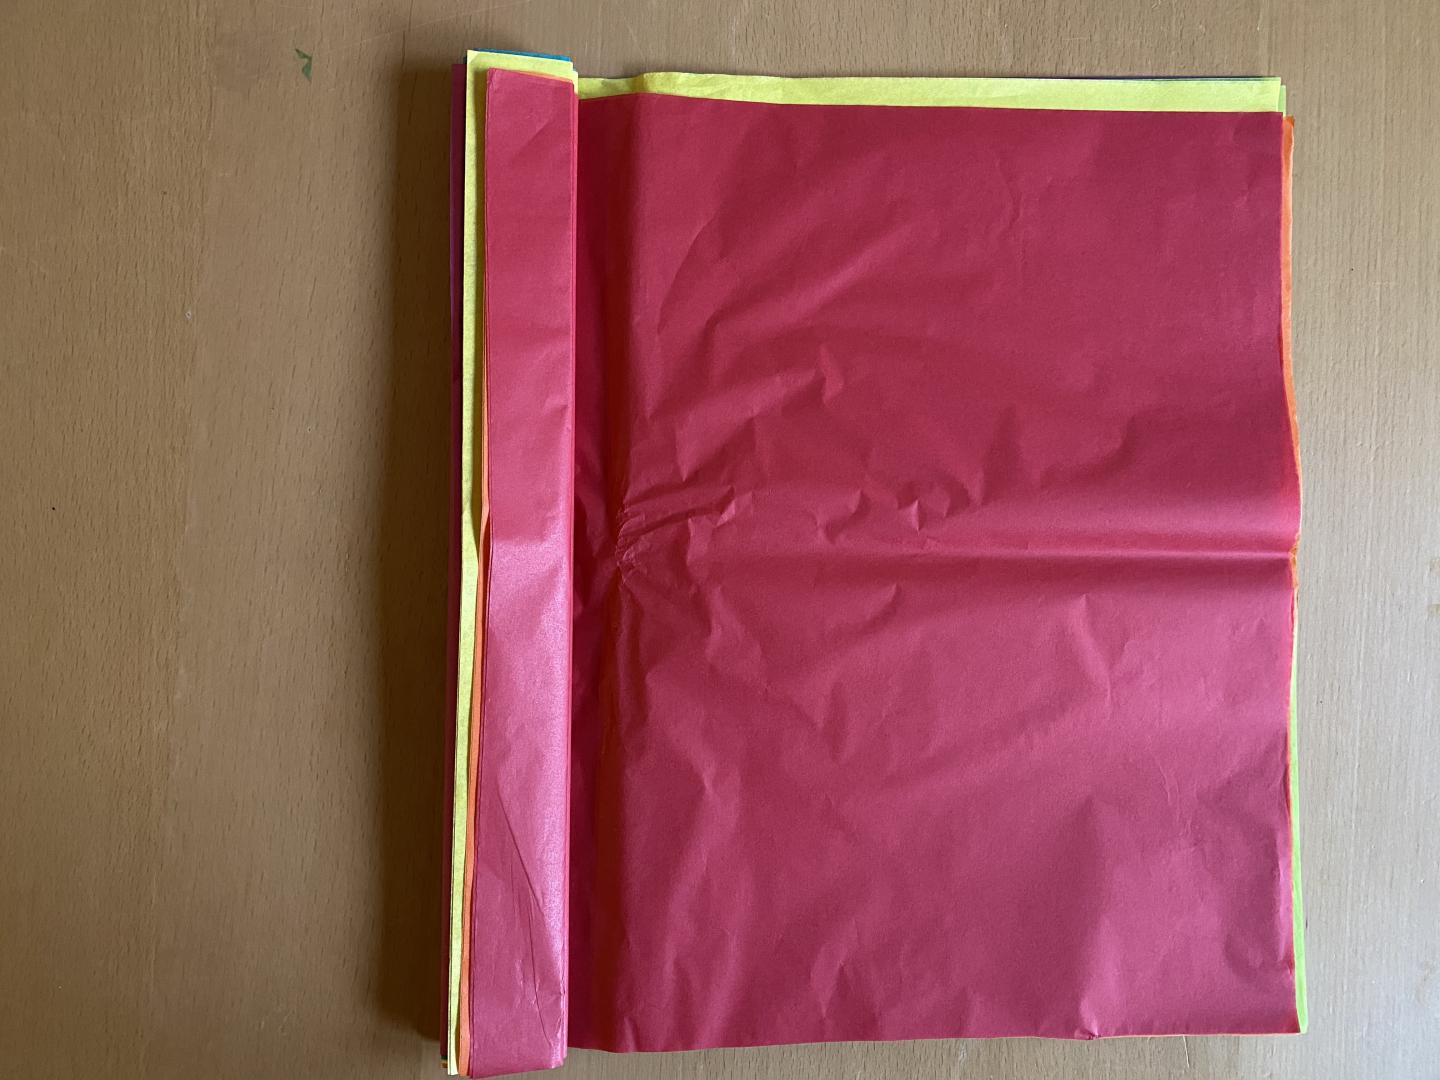 Red tissue paper folded over